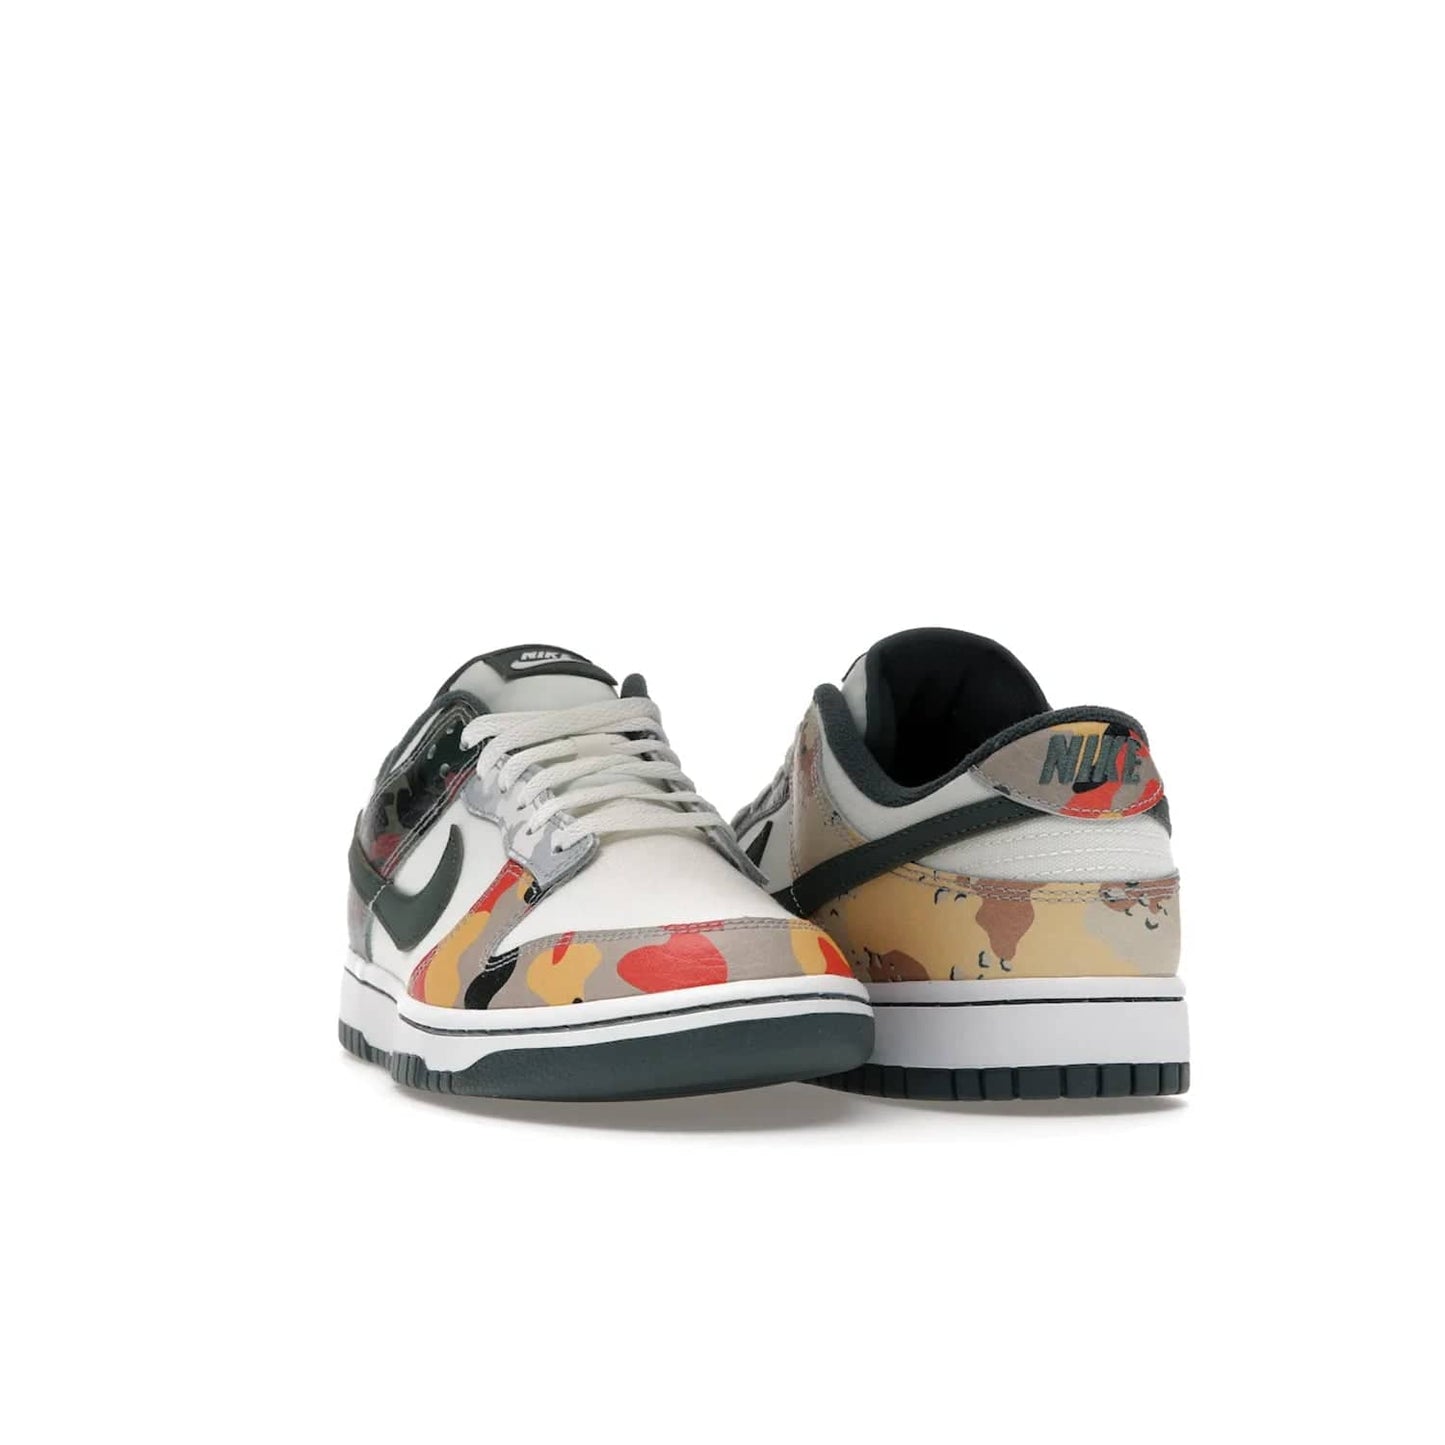 Nike Dunk Low SE Sail Multi-Camo - Image 8 - Only at www.BallersClubKickz.com - Classic design meets statement style in the Nike Dunk Low SE Sail Multi-Camo. White leather base with multi-color camo overlays, vibrant Nike Swooshes, and orange Nike embroidery. Get yours August 2021.